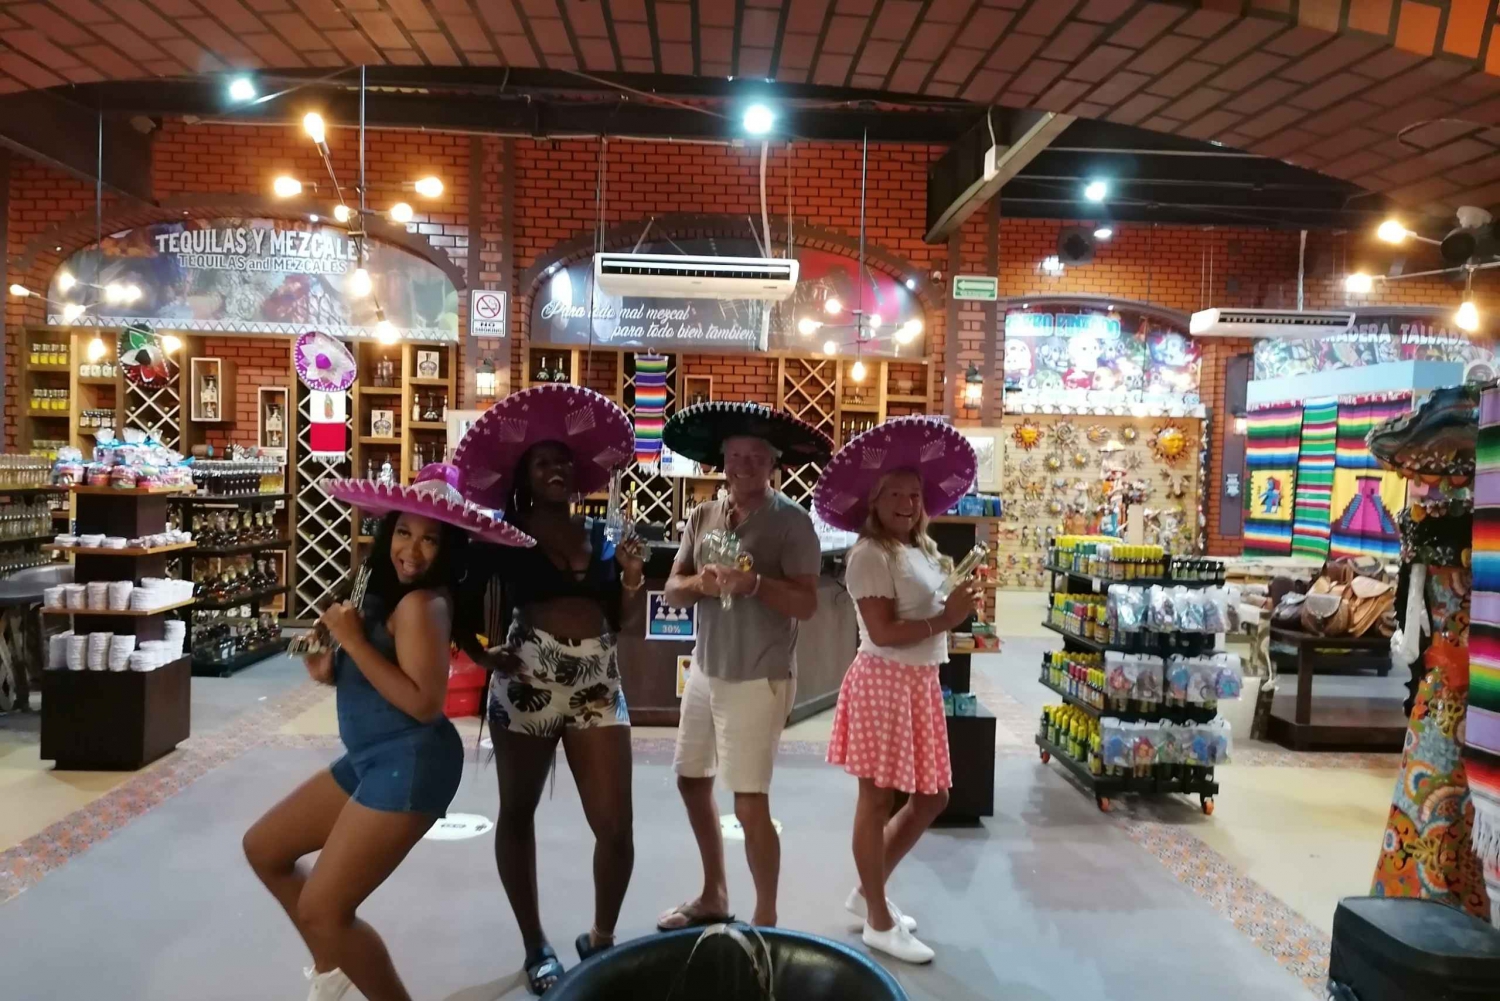 Taco Tour Cancun: City tour, Tacos, Tequila, Beer & Shopping